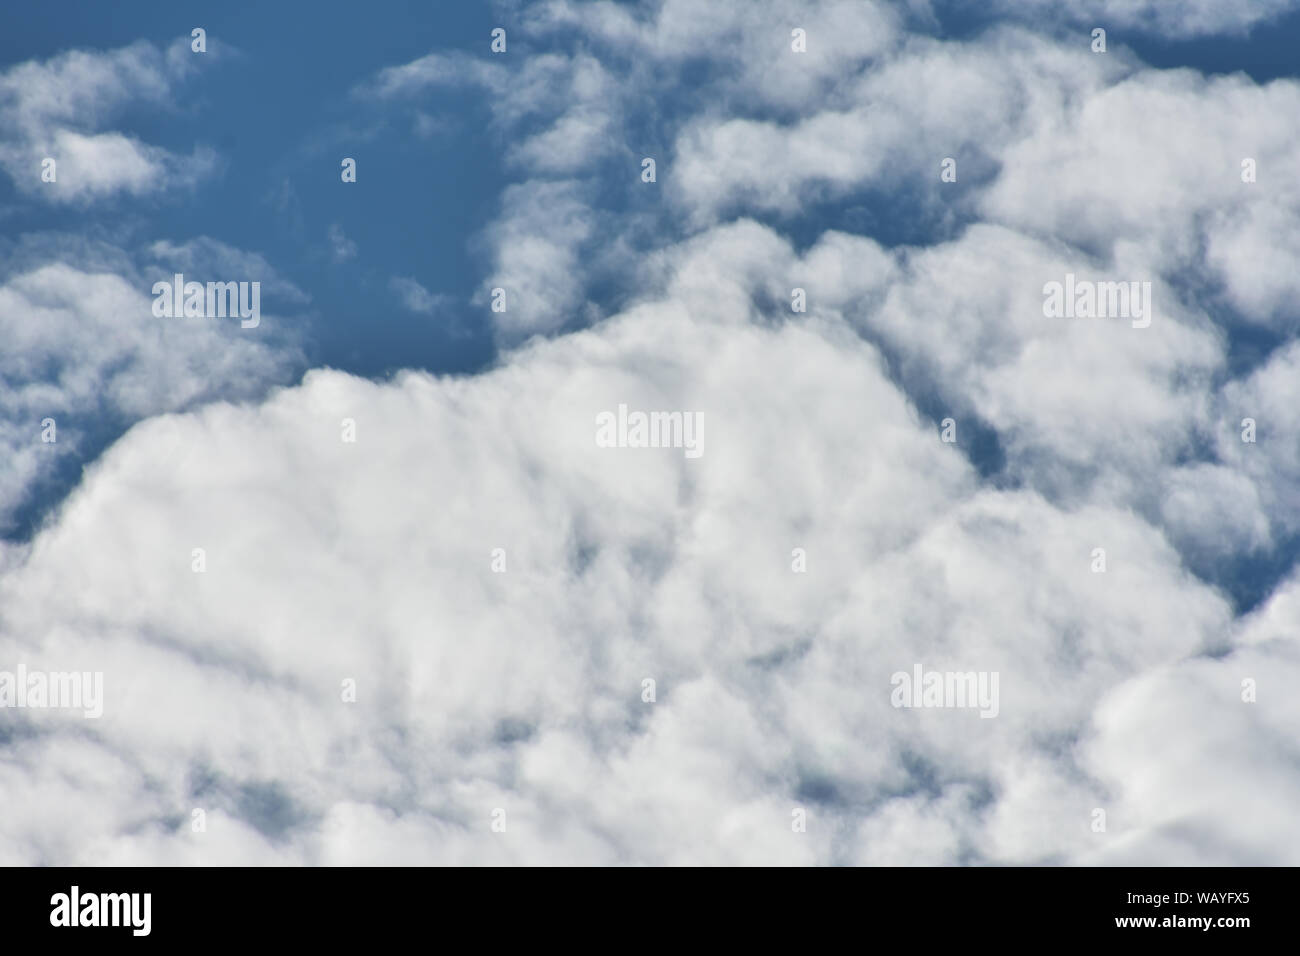 White clouds with blue sky breaking through. Stock Photo